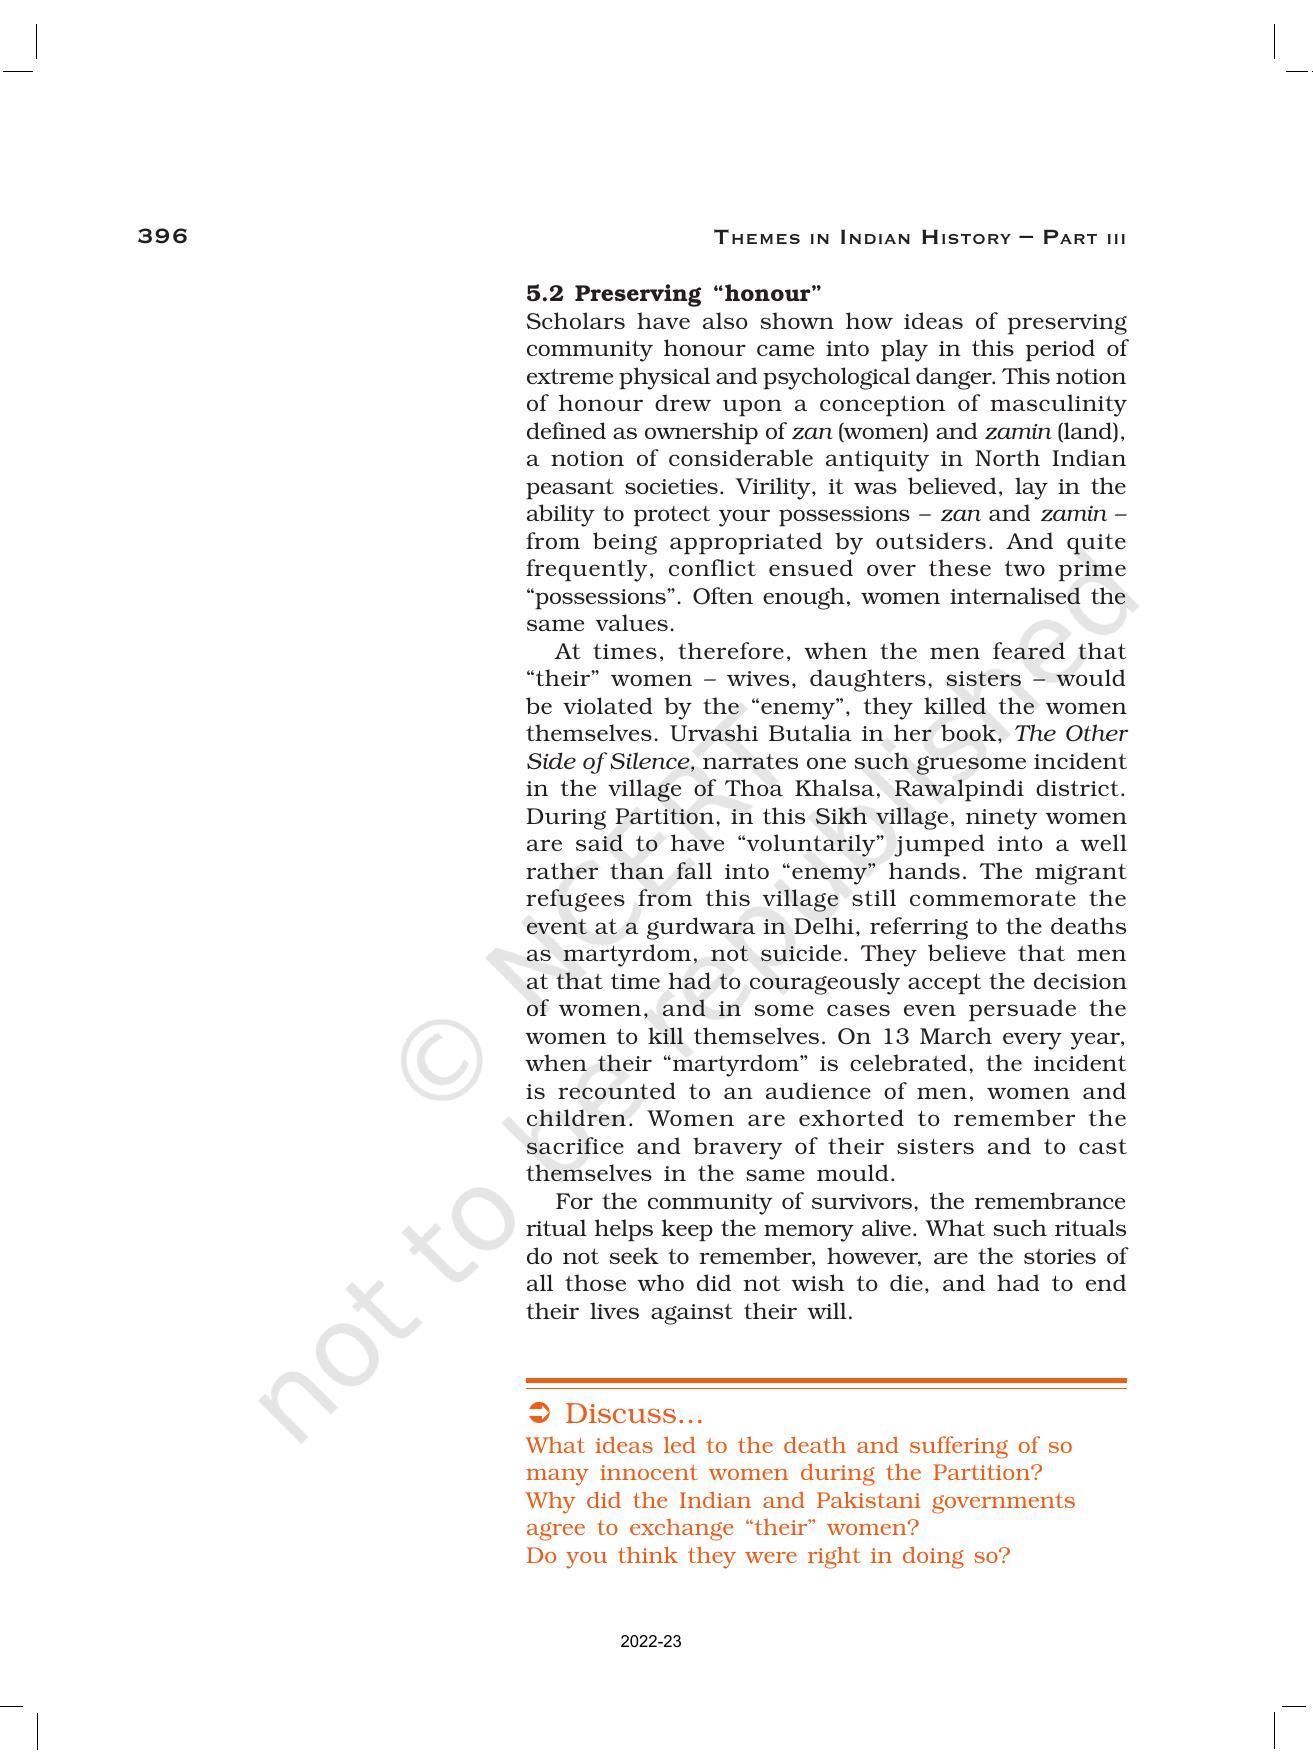 NCERT Book for Class 12 History (Part-III) Chapter 14 Understanding Partition - Page 21